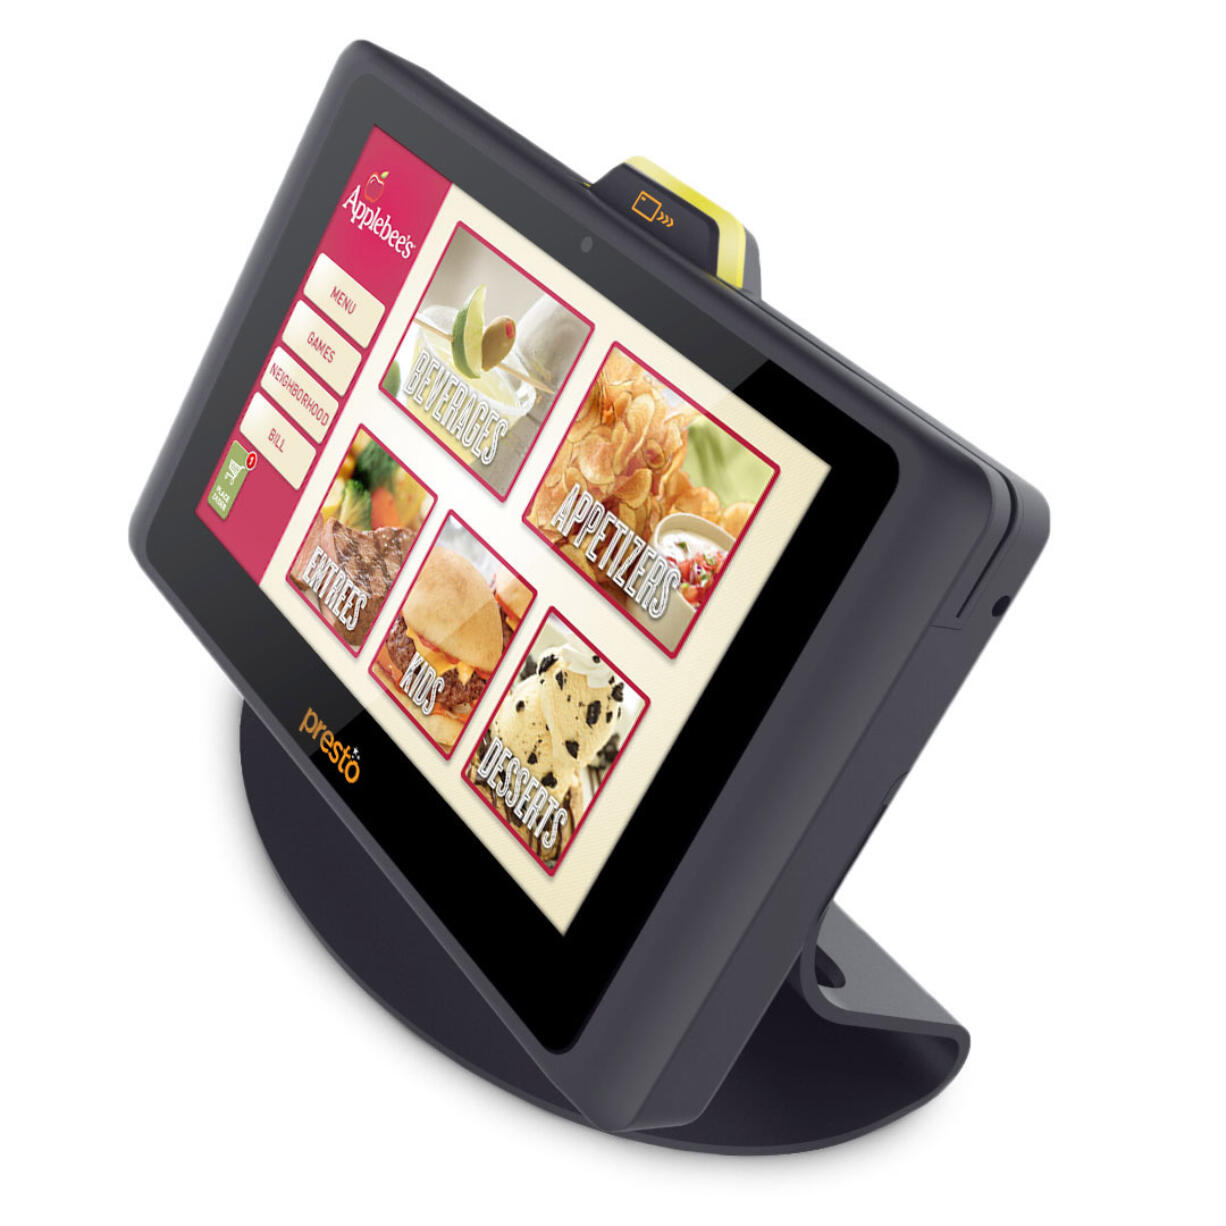 Tables at Applebee&#039;s restaurants in Vancouver feature this optional tablet device that can be used to order food and pay the tab.